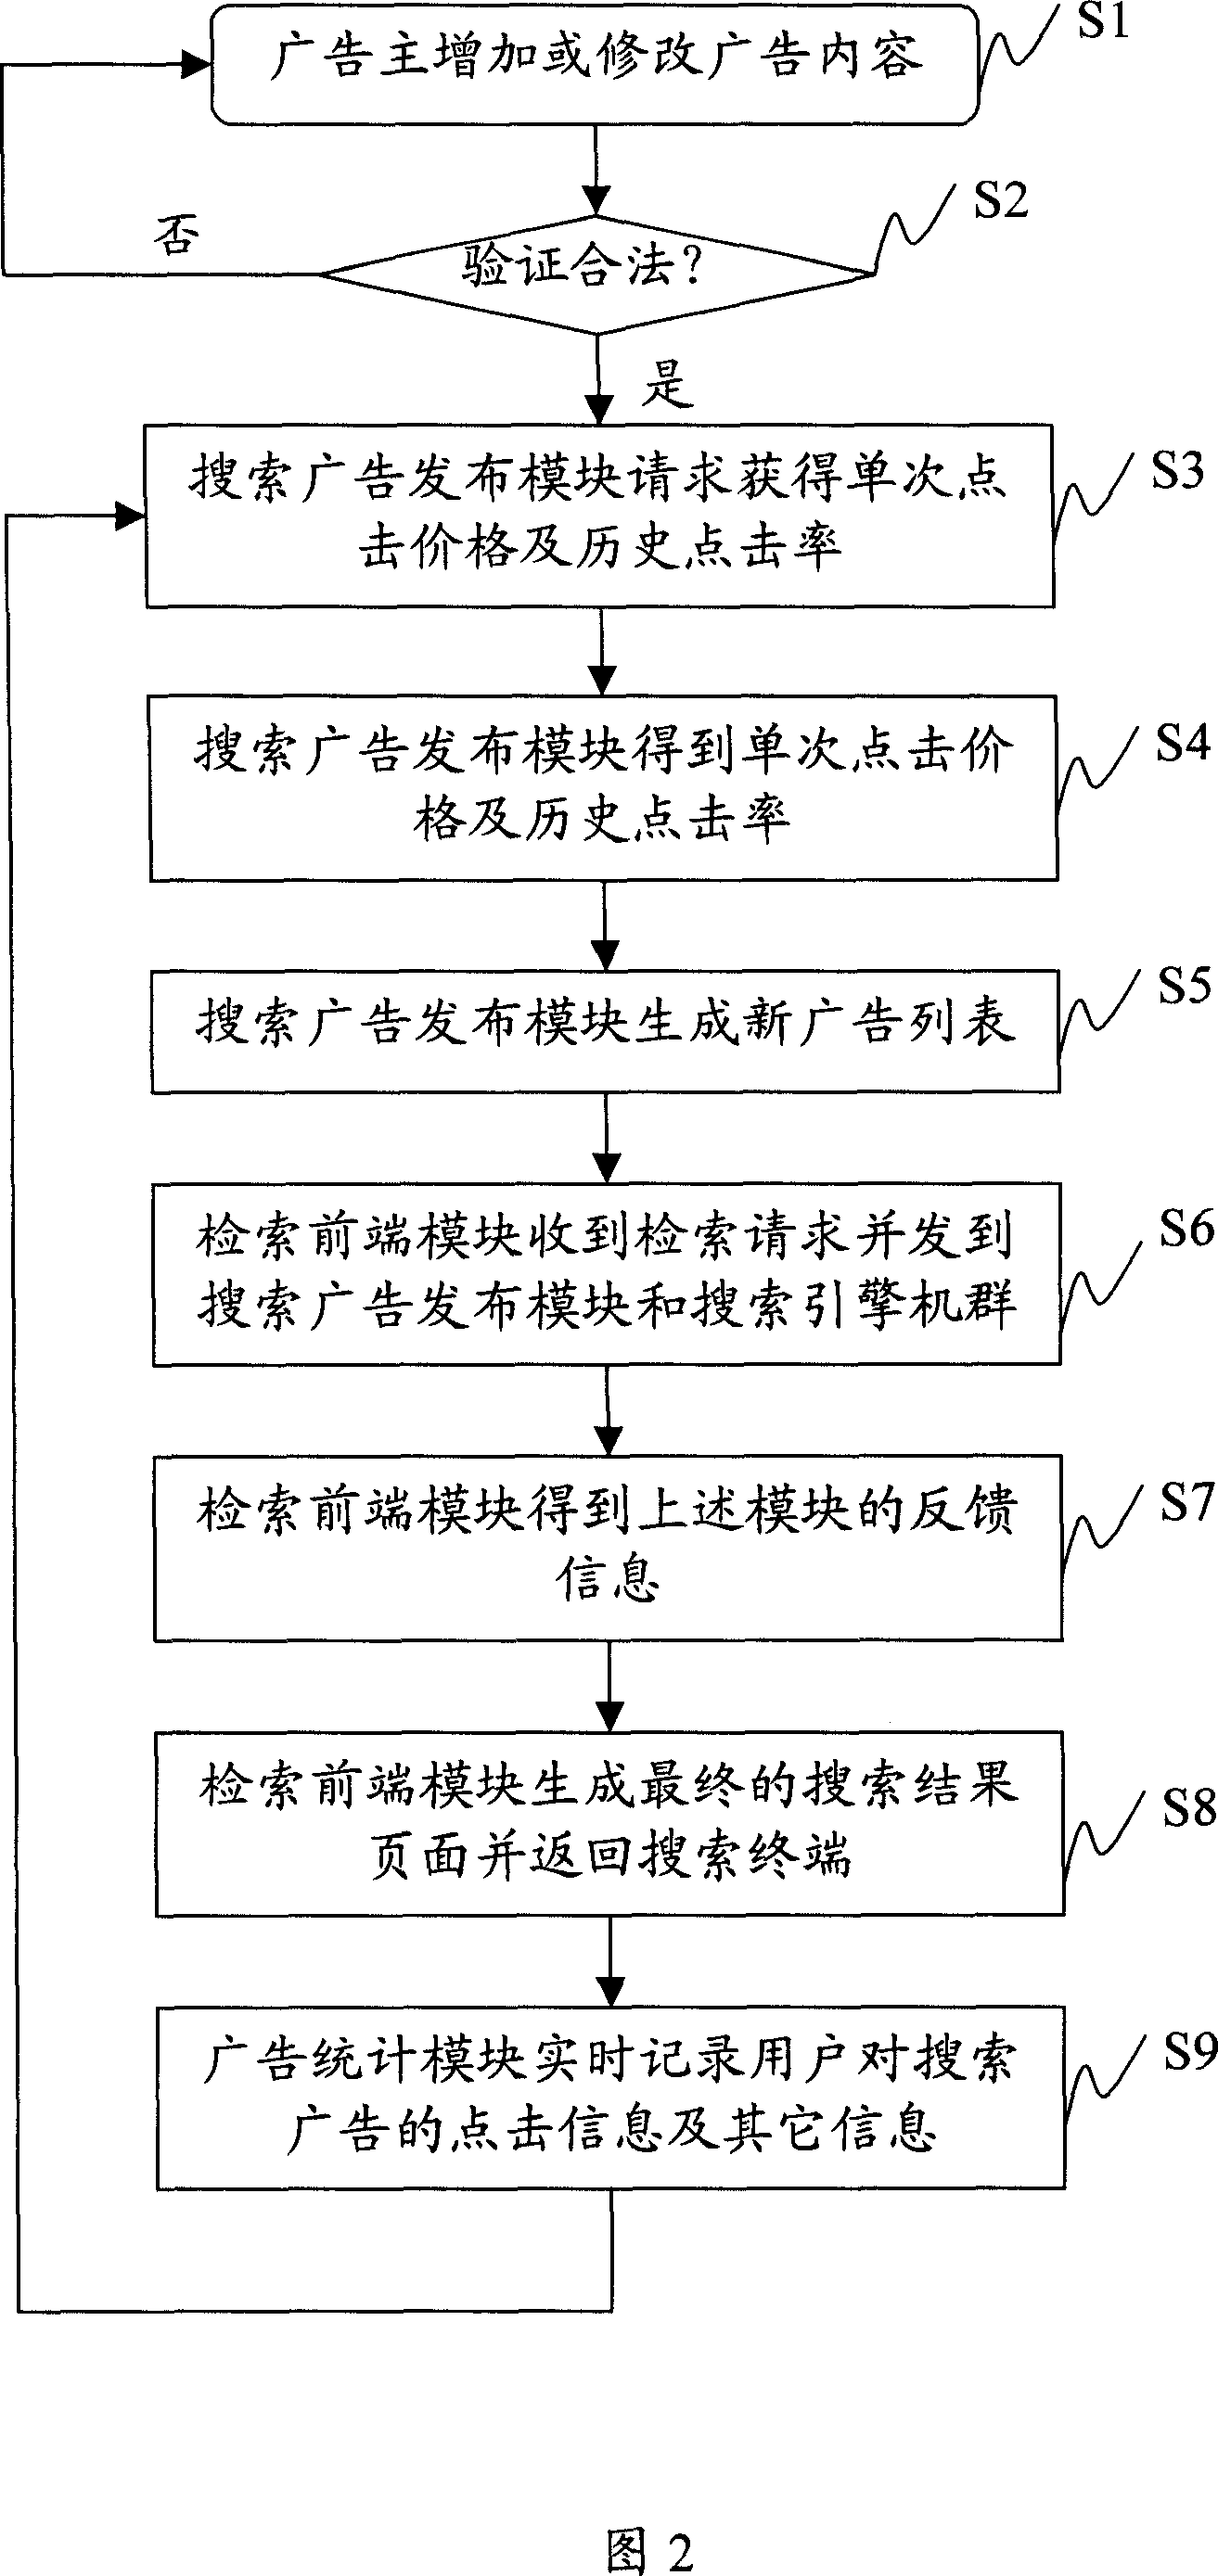 Search advertisement sequencing system and method